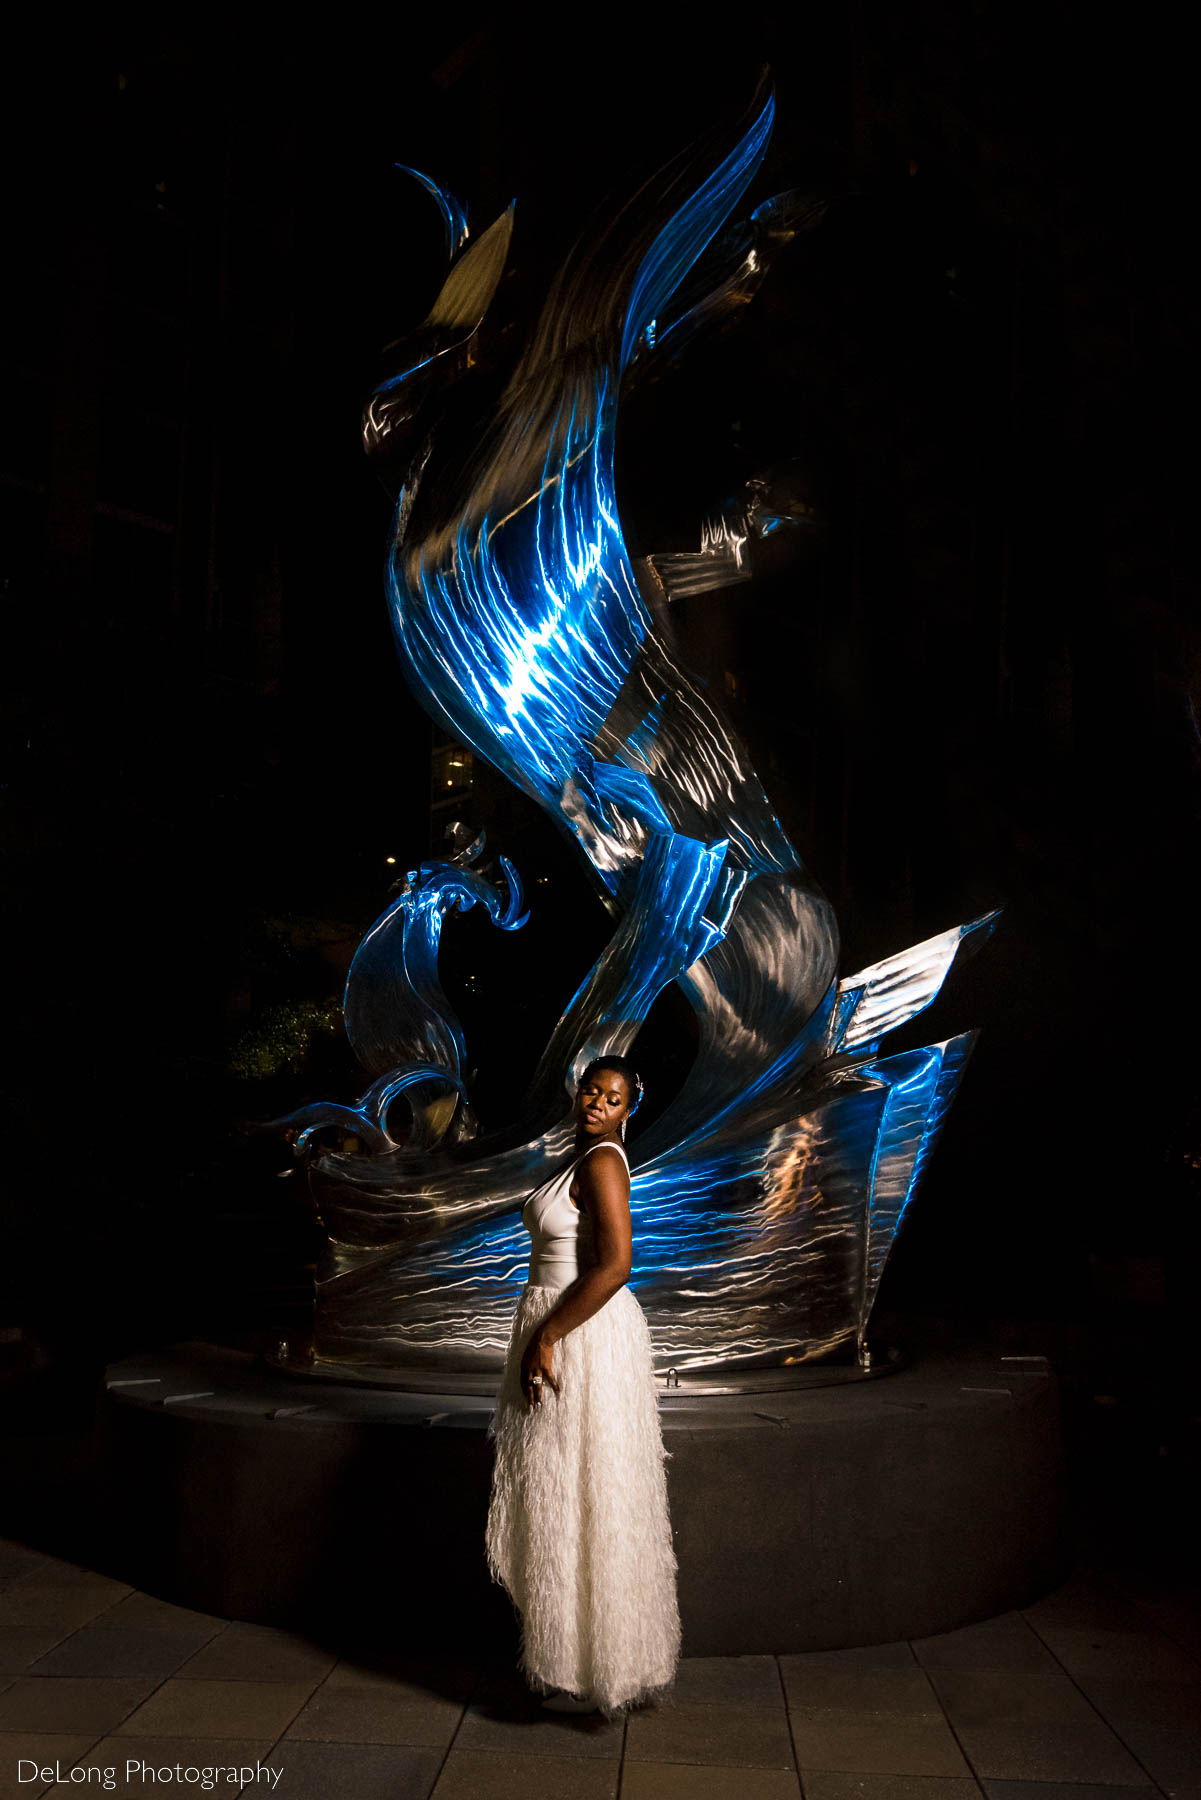 A bridal portrait  in front of a blue-lit sculpture at Romare Bearden Park in Uptown Charlotte, NC by Charlotte wedding photographers DeLong Photography